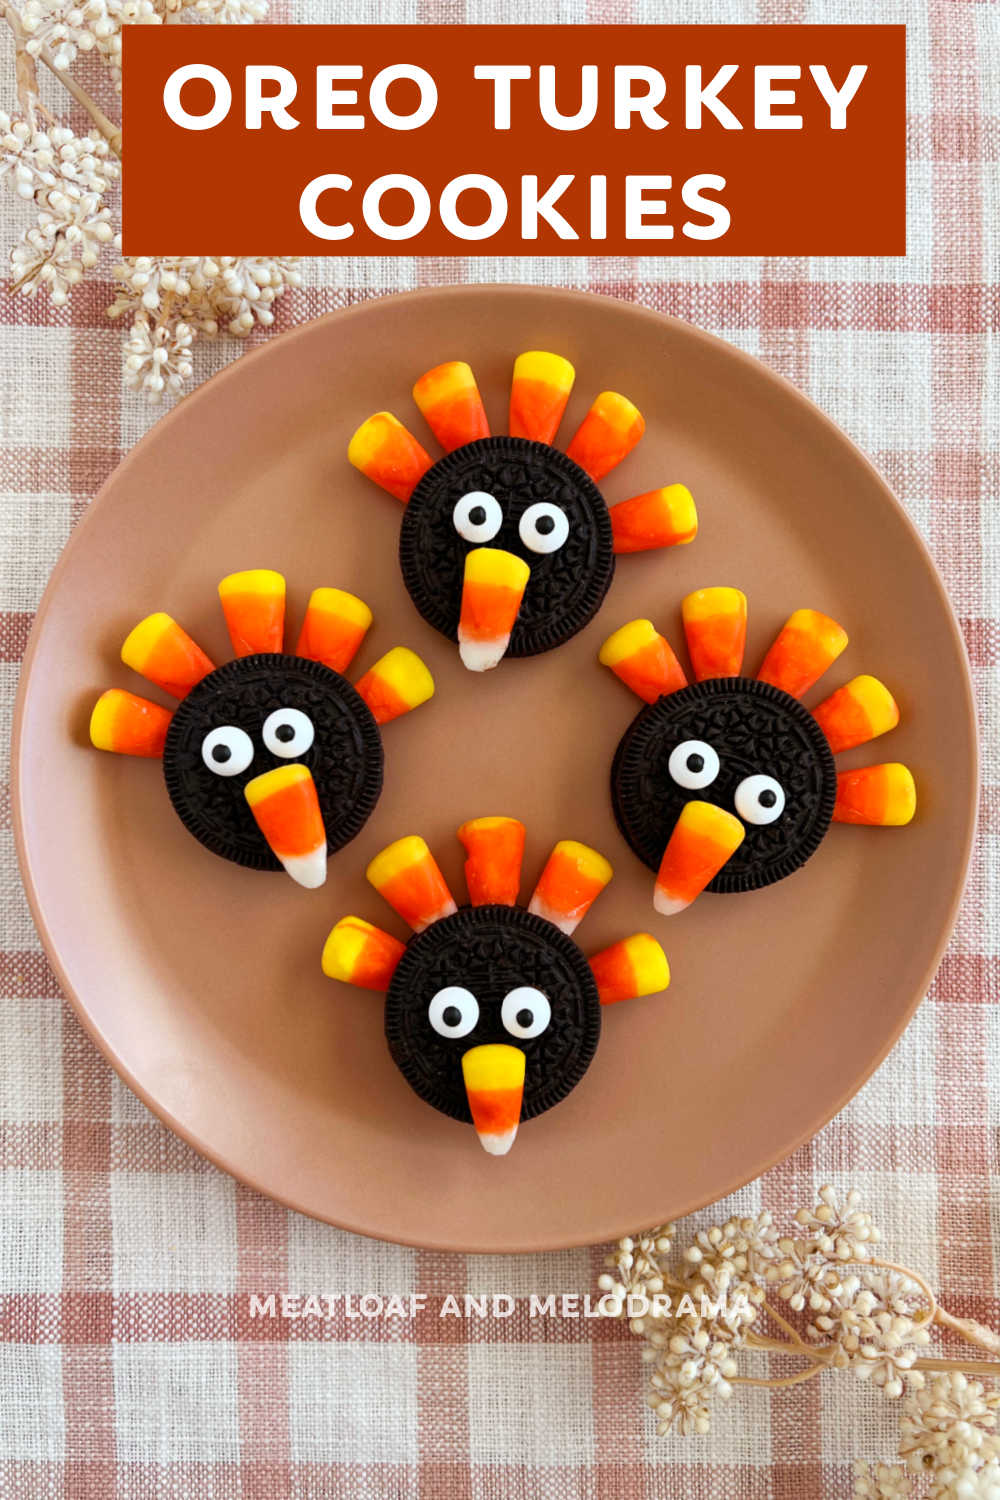 Oreo Turkey Cookies with Oreos and a few simple ingredients are an easy Thanksgiving dessert for kids of all ages. A cute no bake dessert perfect for Thanksgiving dinner! via @meamel